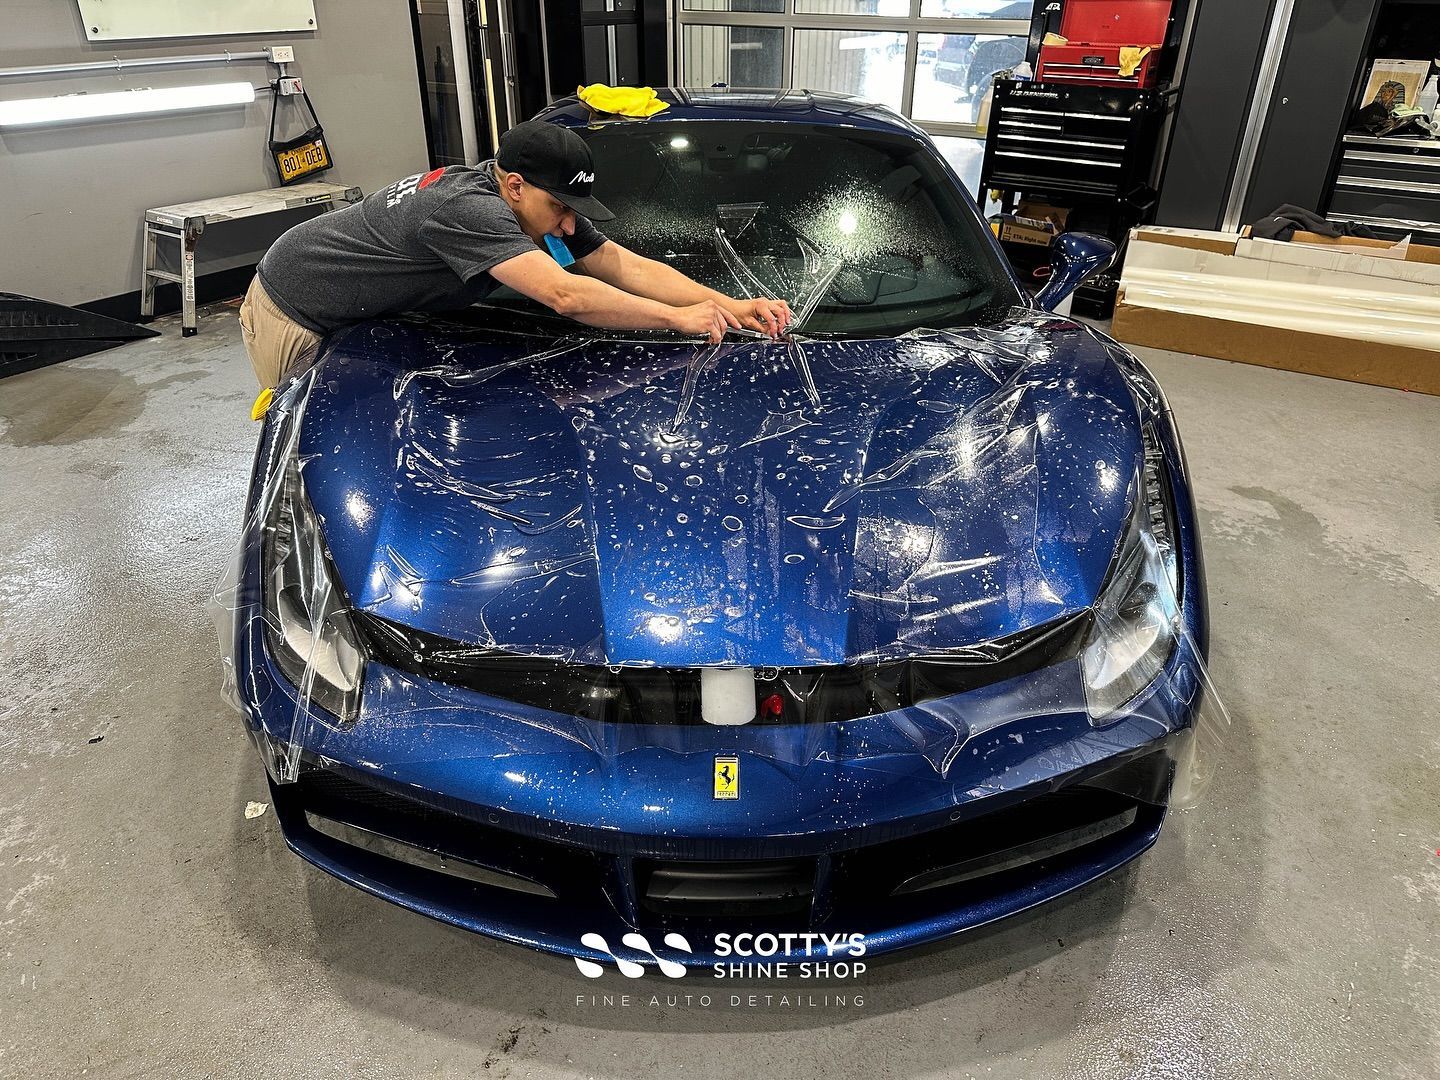 This beautiful Ferrari 488GTB is at the shop for removal of old, damaged paint protection film and i